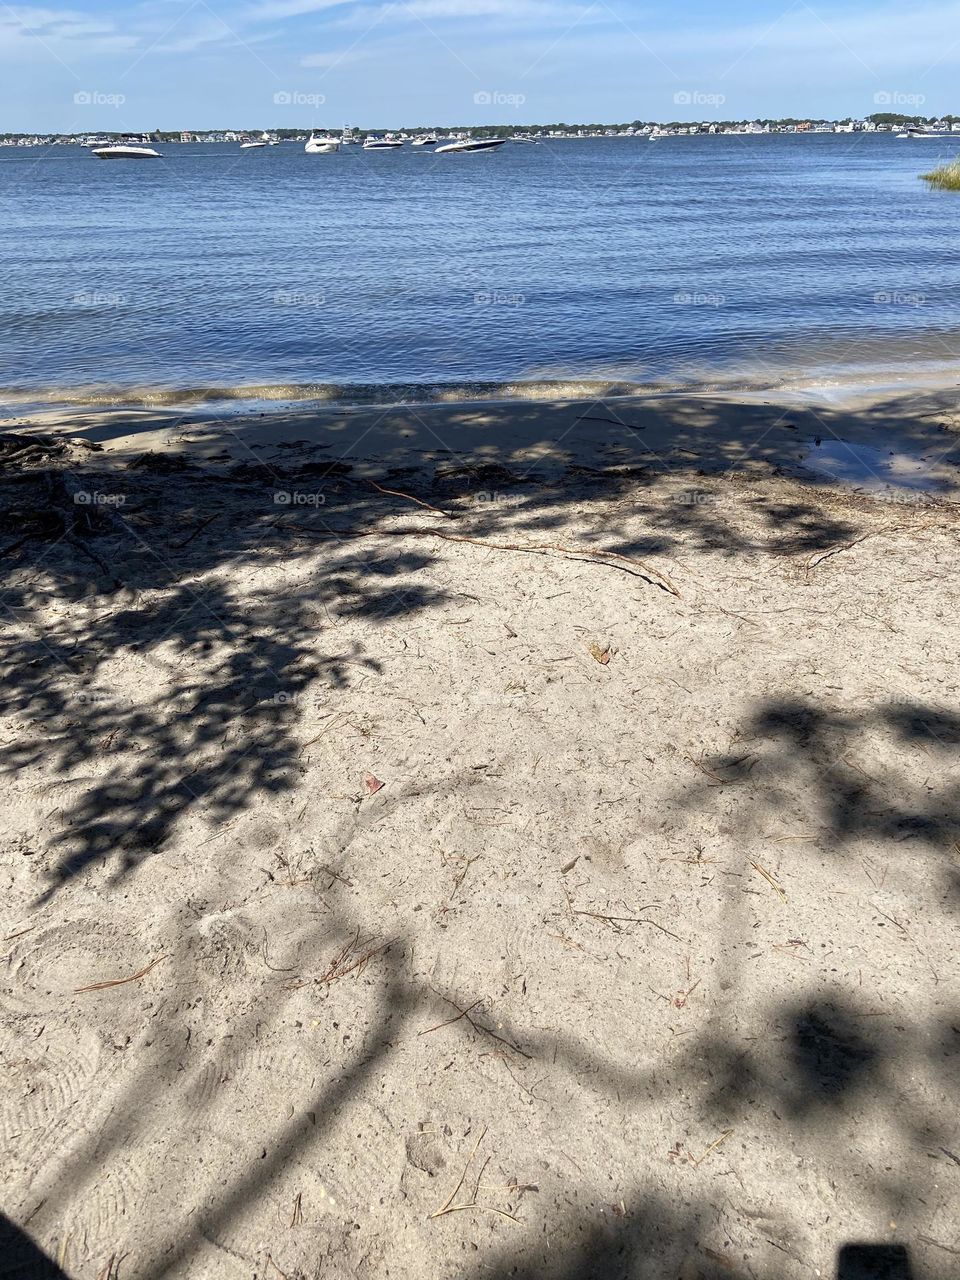 The beach at Cattus Island Park in Toms River, NJ. A hike through the trails in the woods leads to beautiful and secluded beaches like this one. You can sit beneath the trees and look out at the waters of Silver Bay. 